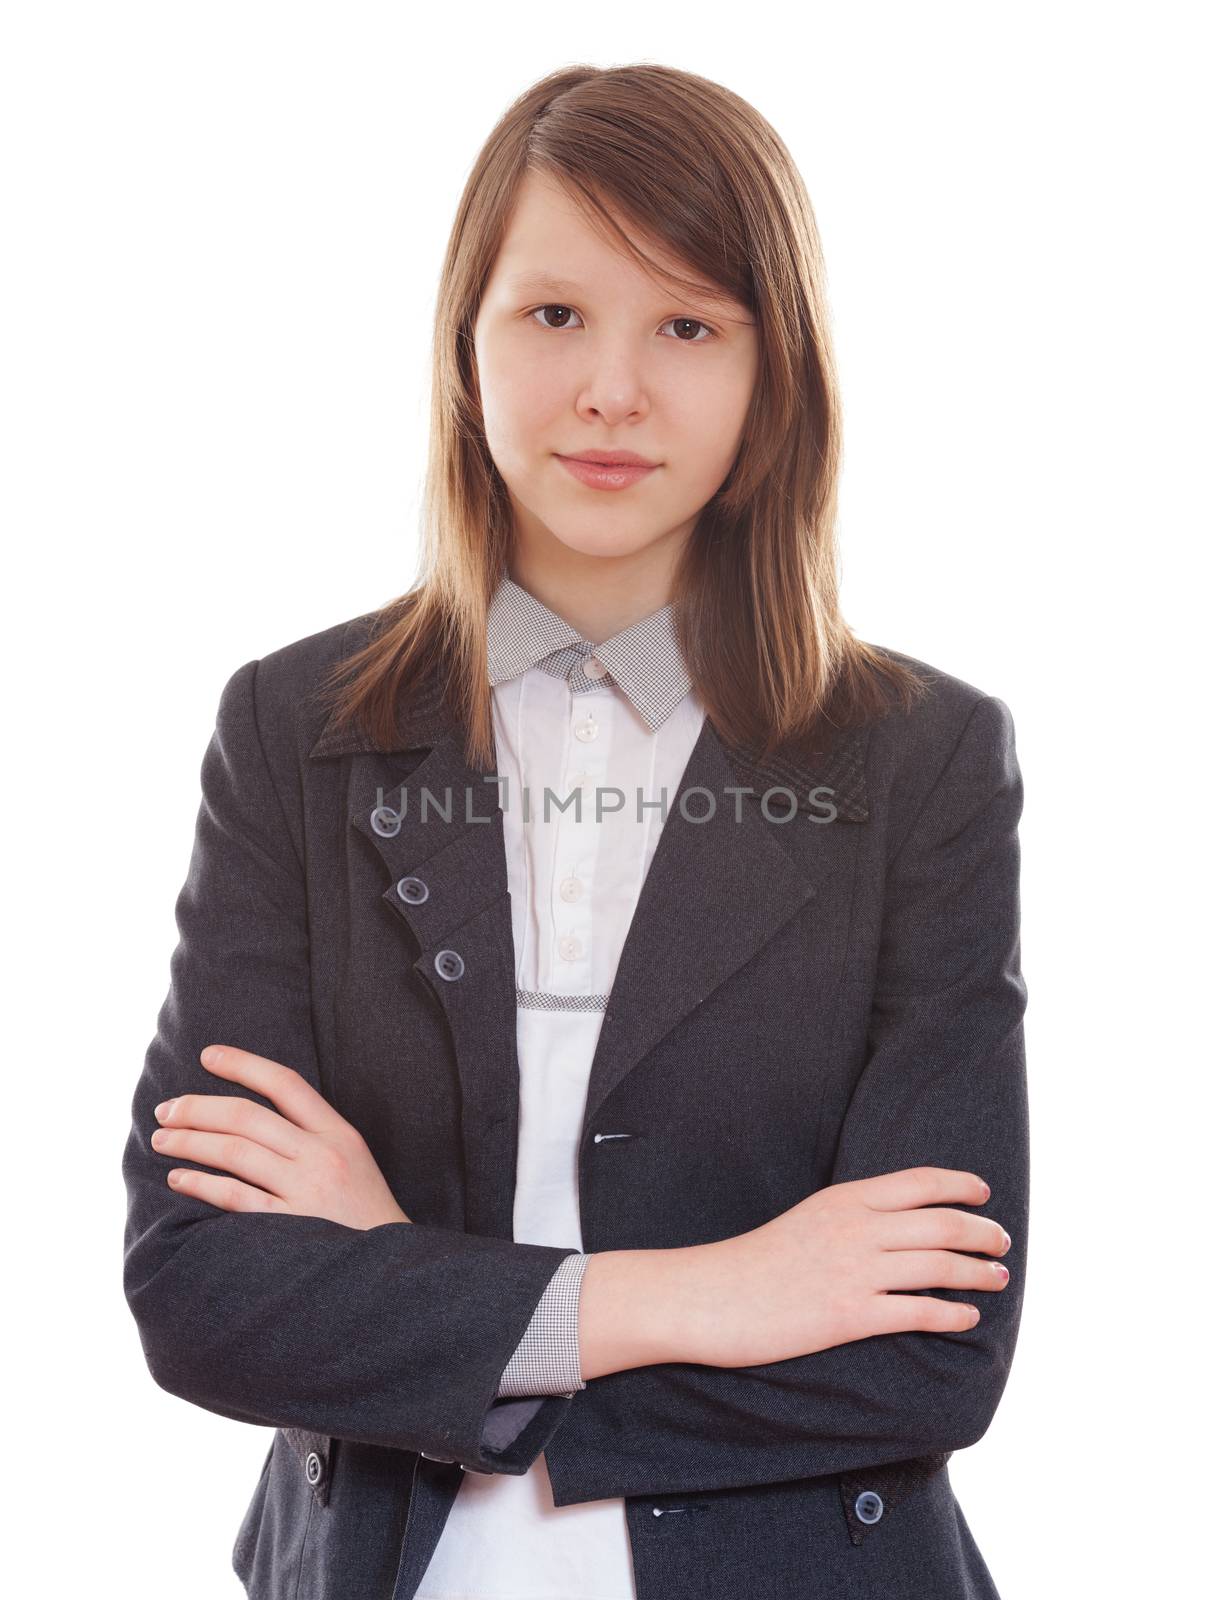 Calm and relaxed teen high school student isolated